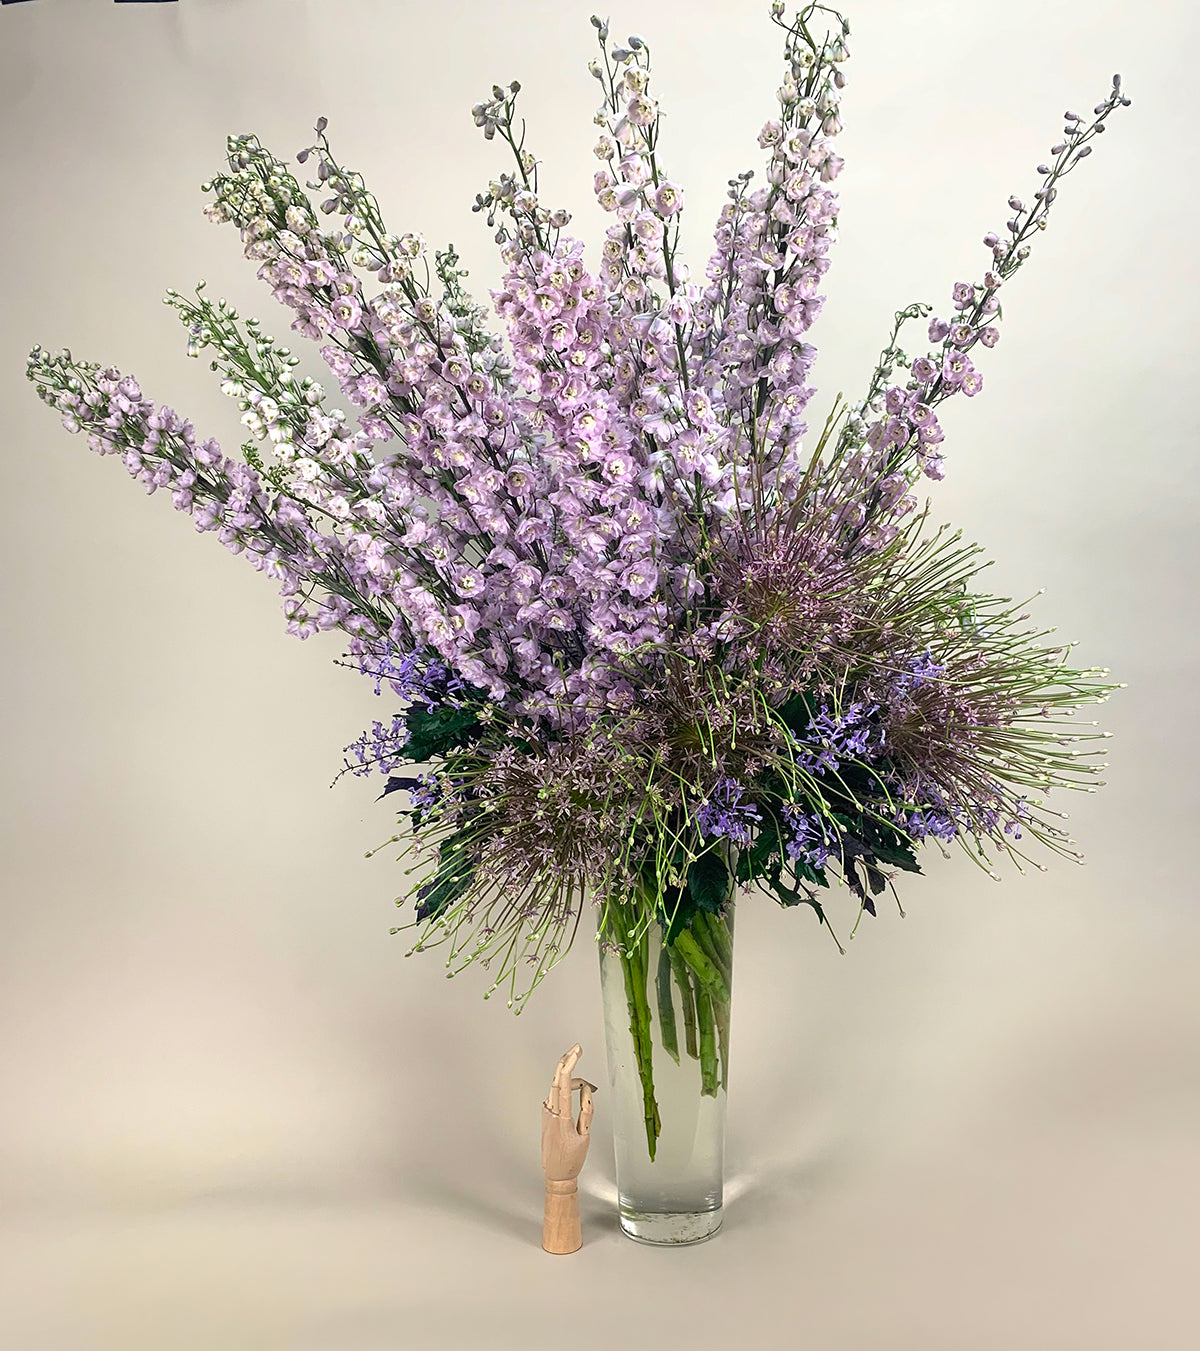 An elegant purple floral arrangement in a vase from TAKAYASATO.COM's ECCENTRIC collection.